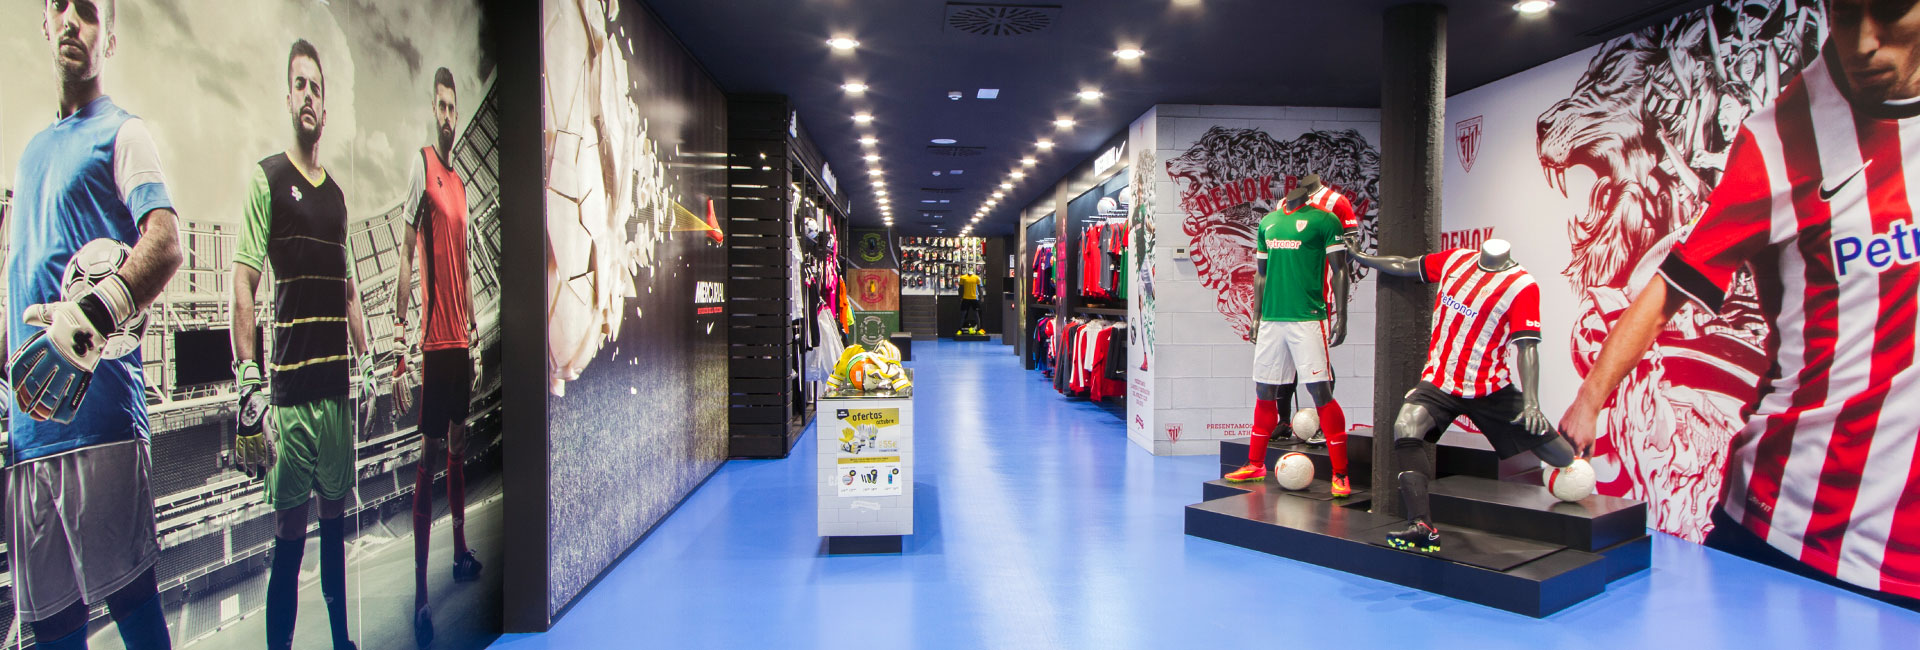 outlet nike bilbao